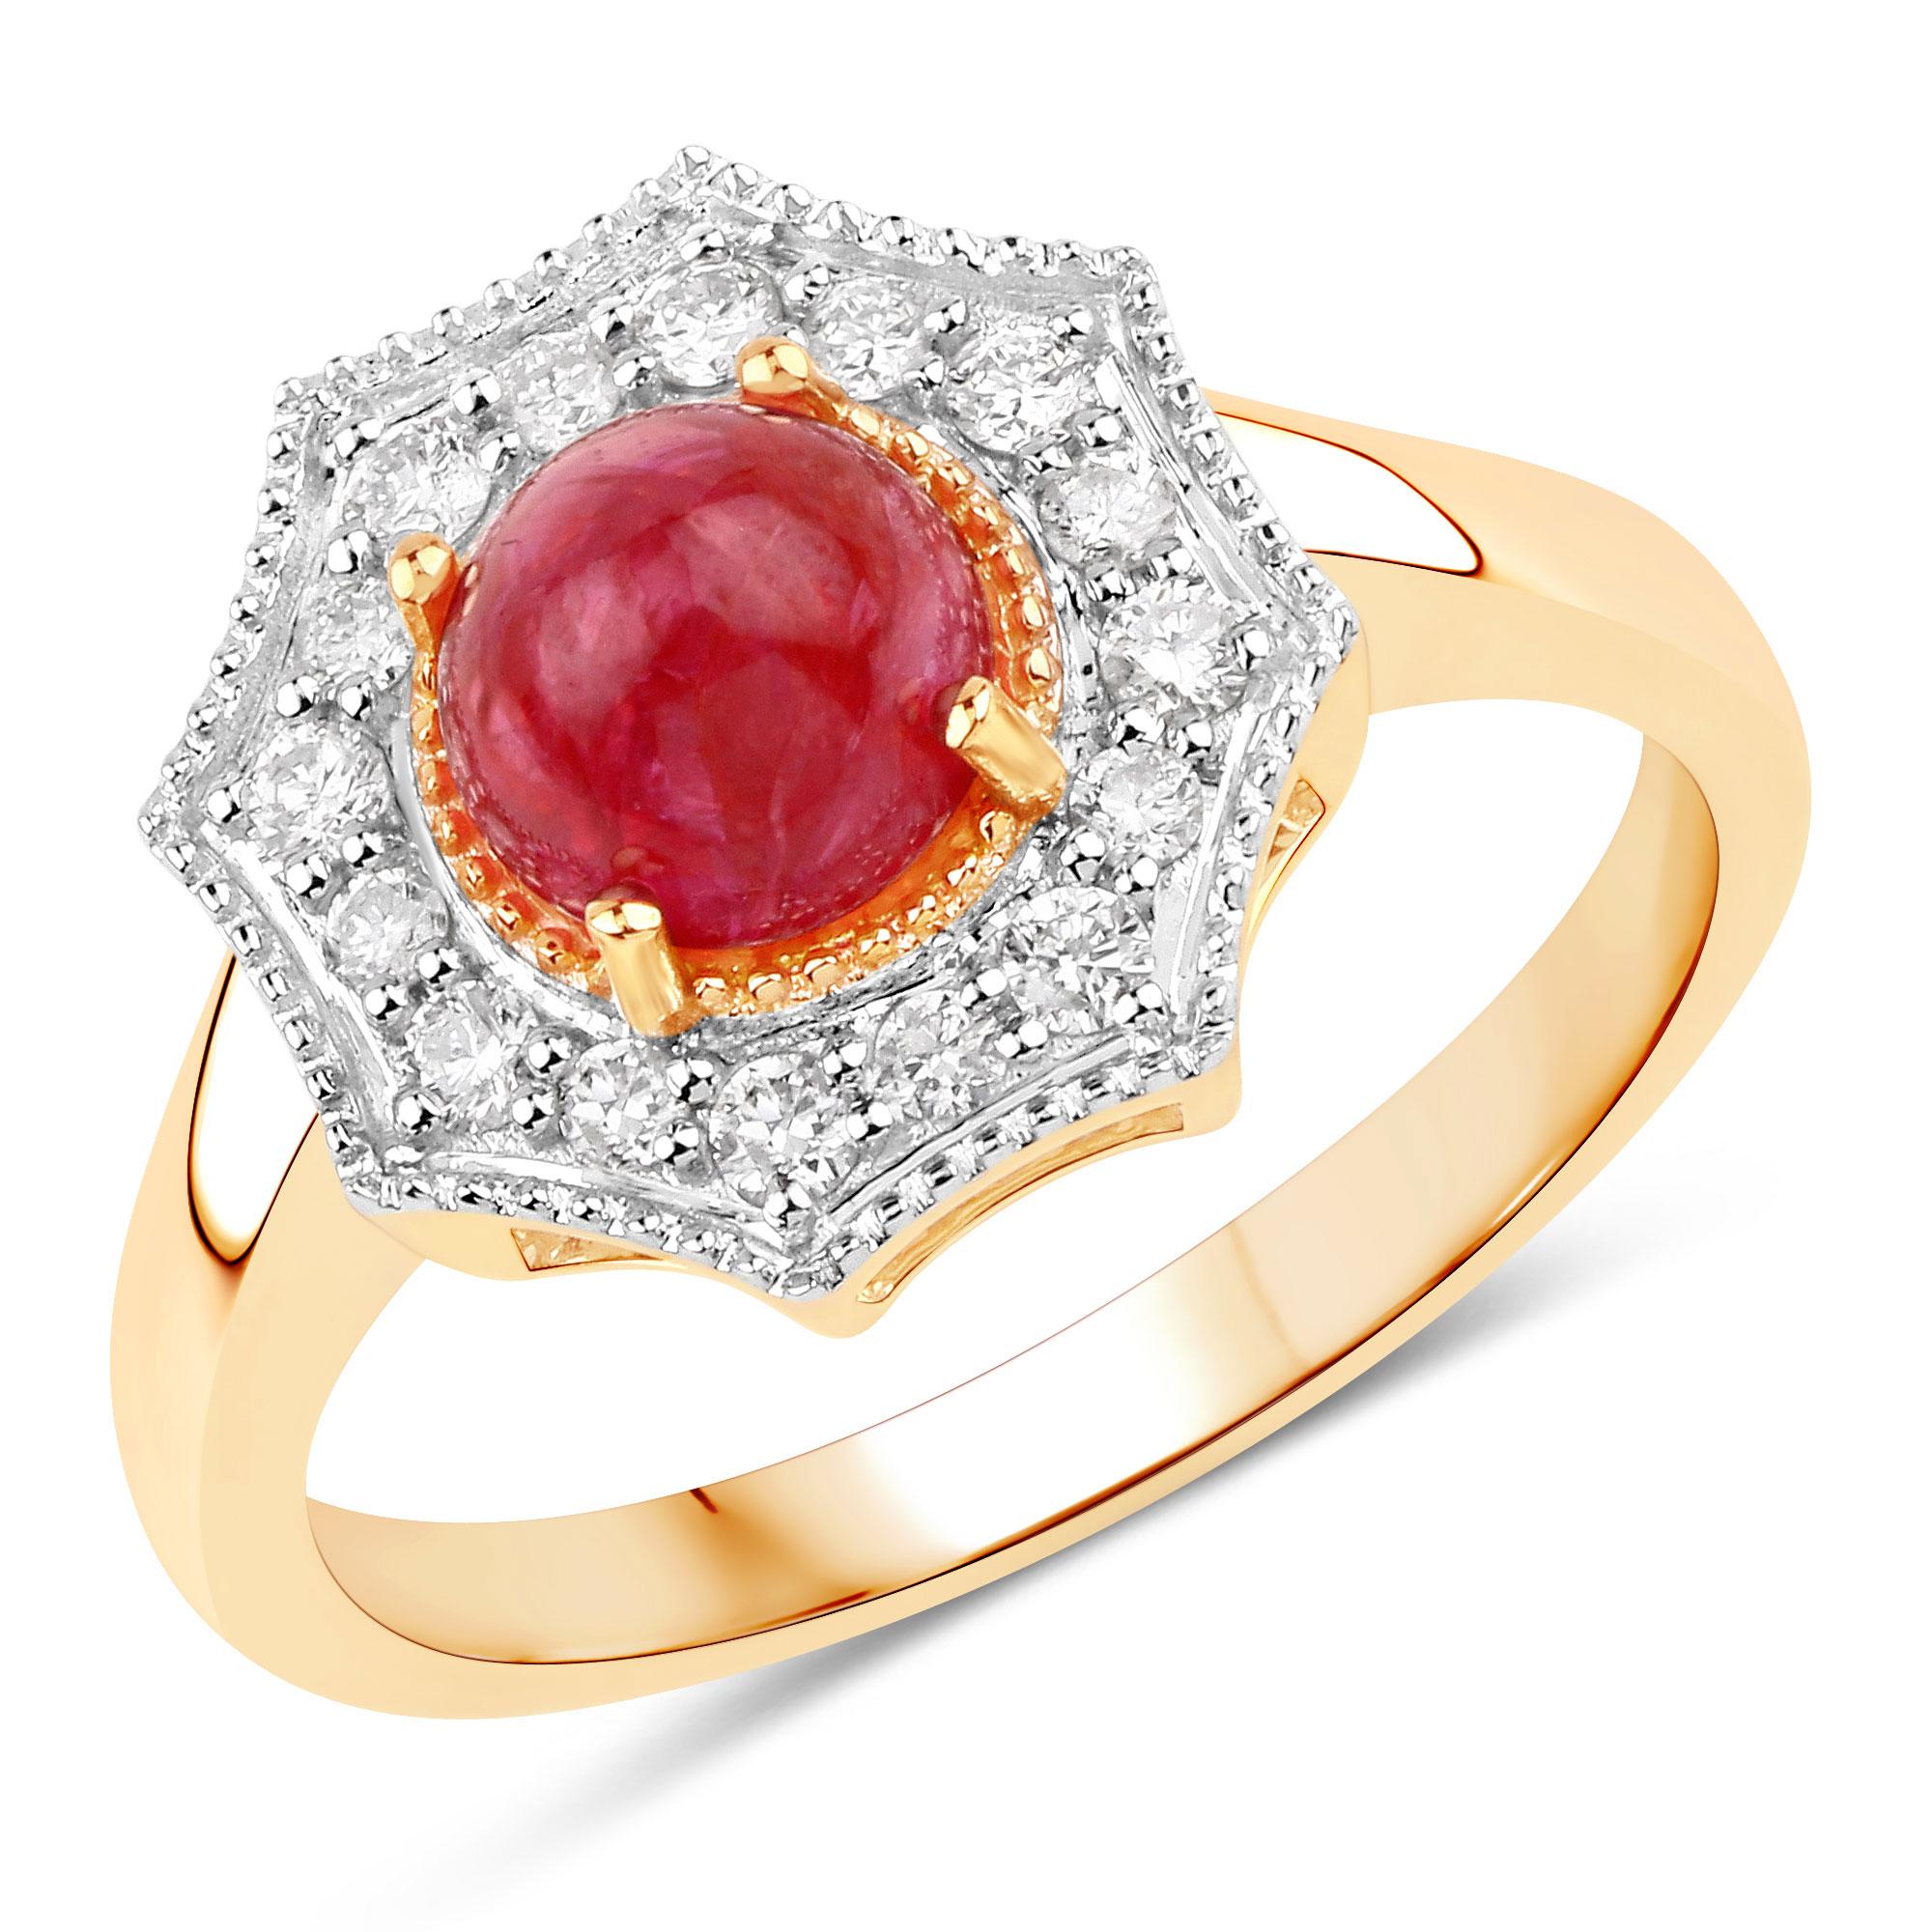 It comes with the appraisal by GIA GG/AJP
All Gemstones are Natural
Ruby = 1.76 Carat
16 Round White Diamonds = 0.25 Carats
Metal: 14K Yellow Gold
Ring Size: 7* US
*It can be resized complimentary